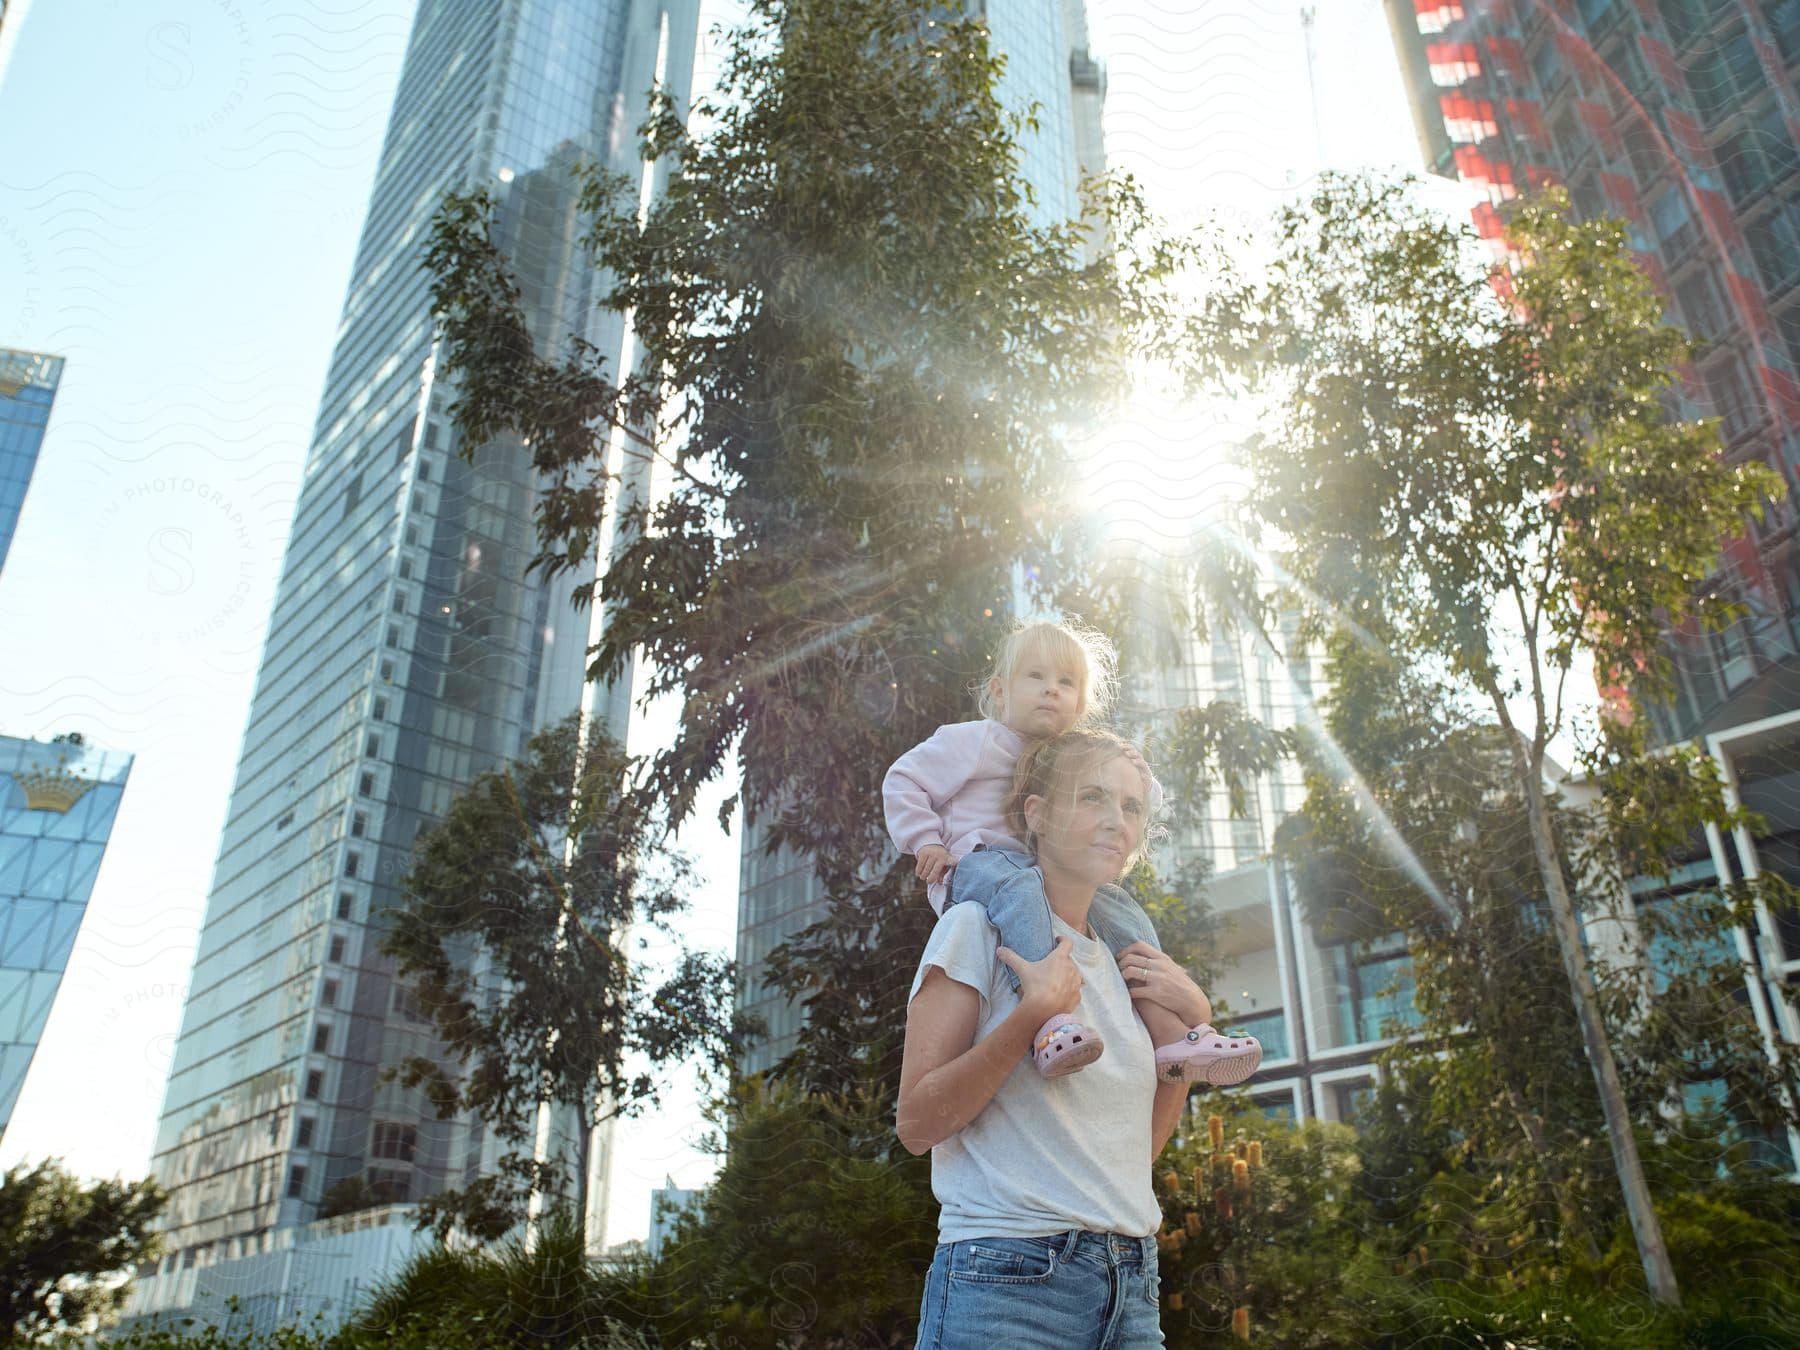 Mother carrying her daughter on her shoulders as they walk through a metropolis with skyscrapers and greenery in the sunlight.